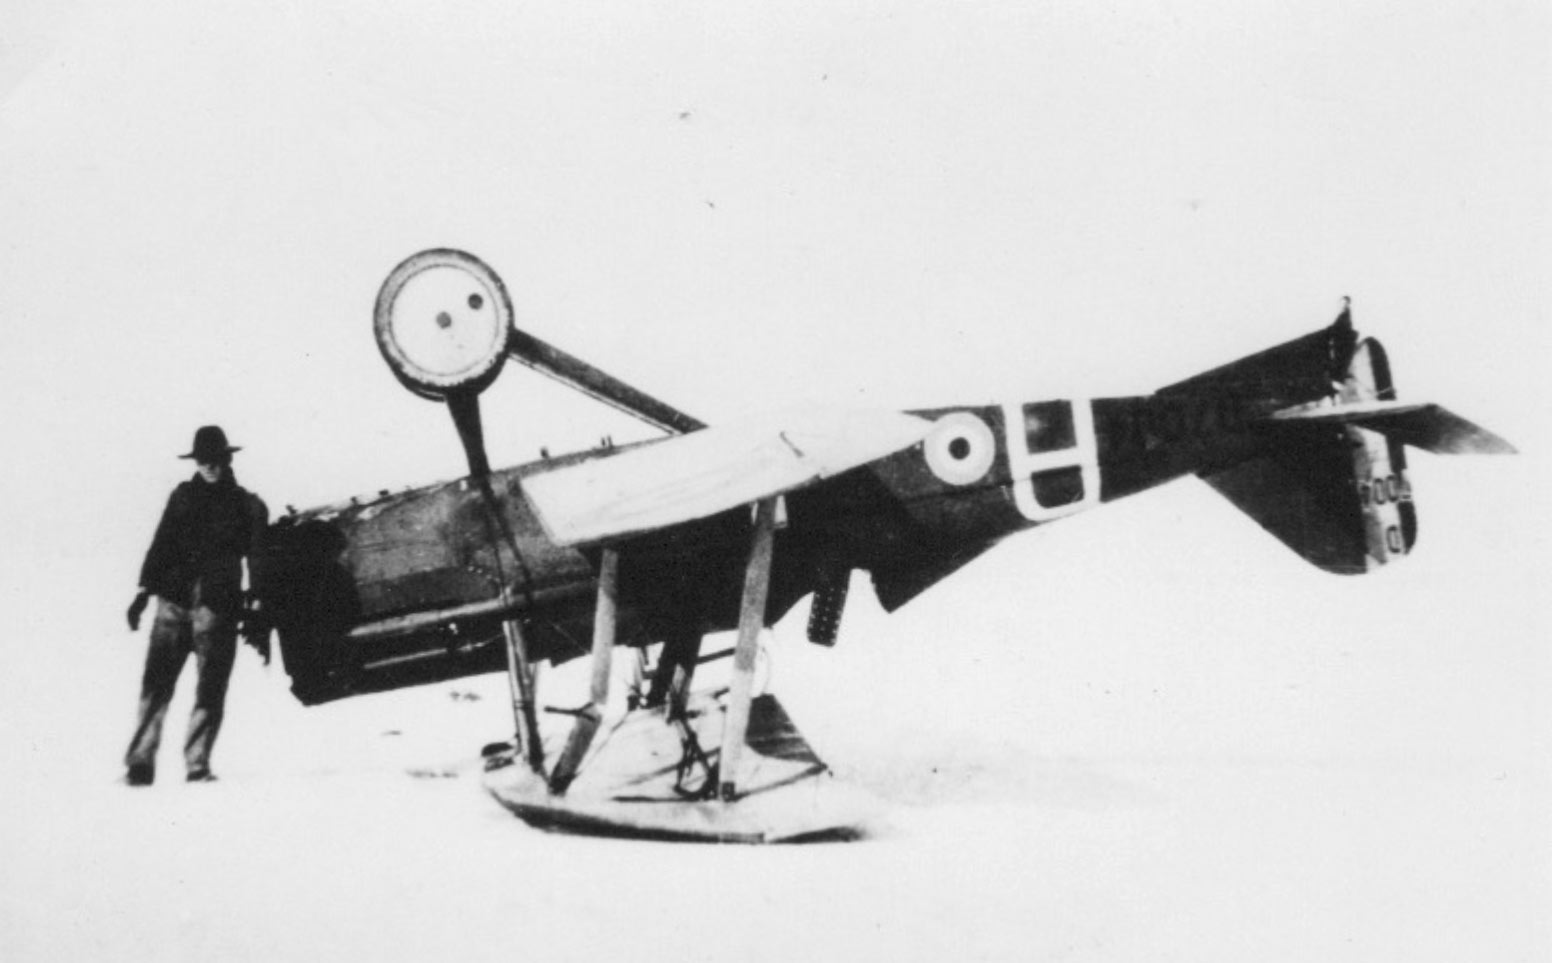 Dibb's SE5a (D7004) crashed at Ruisseauville, 10 February 1919. Dibbs was delivering mail by air.